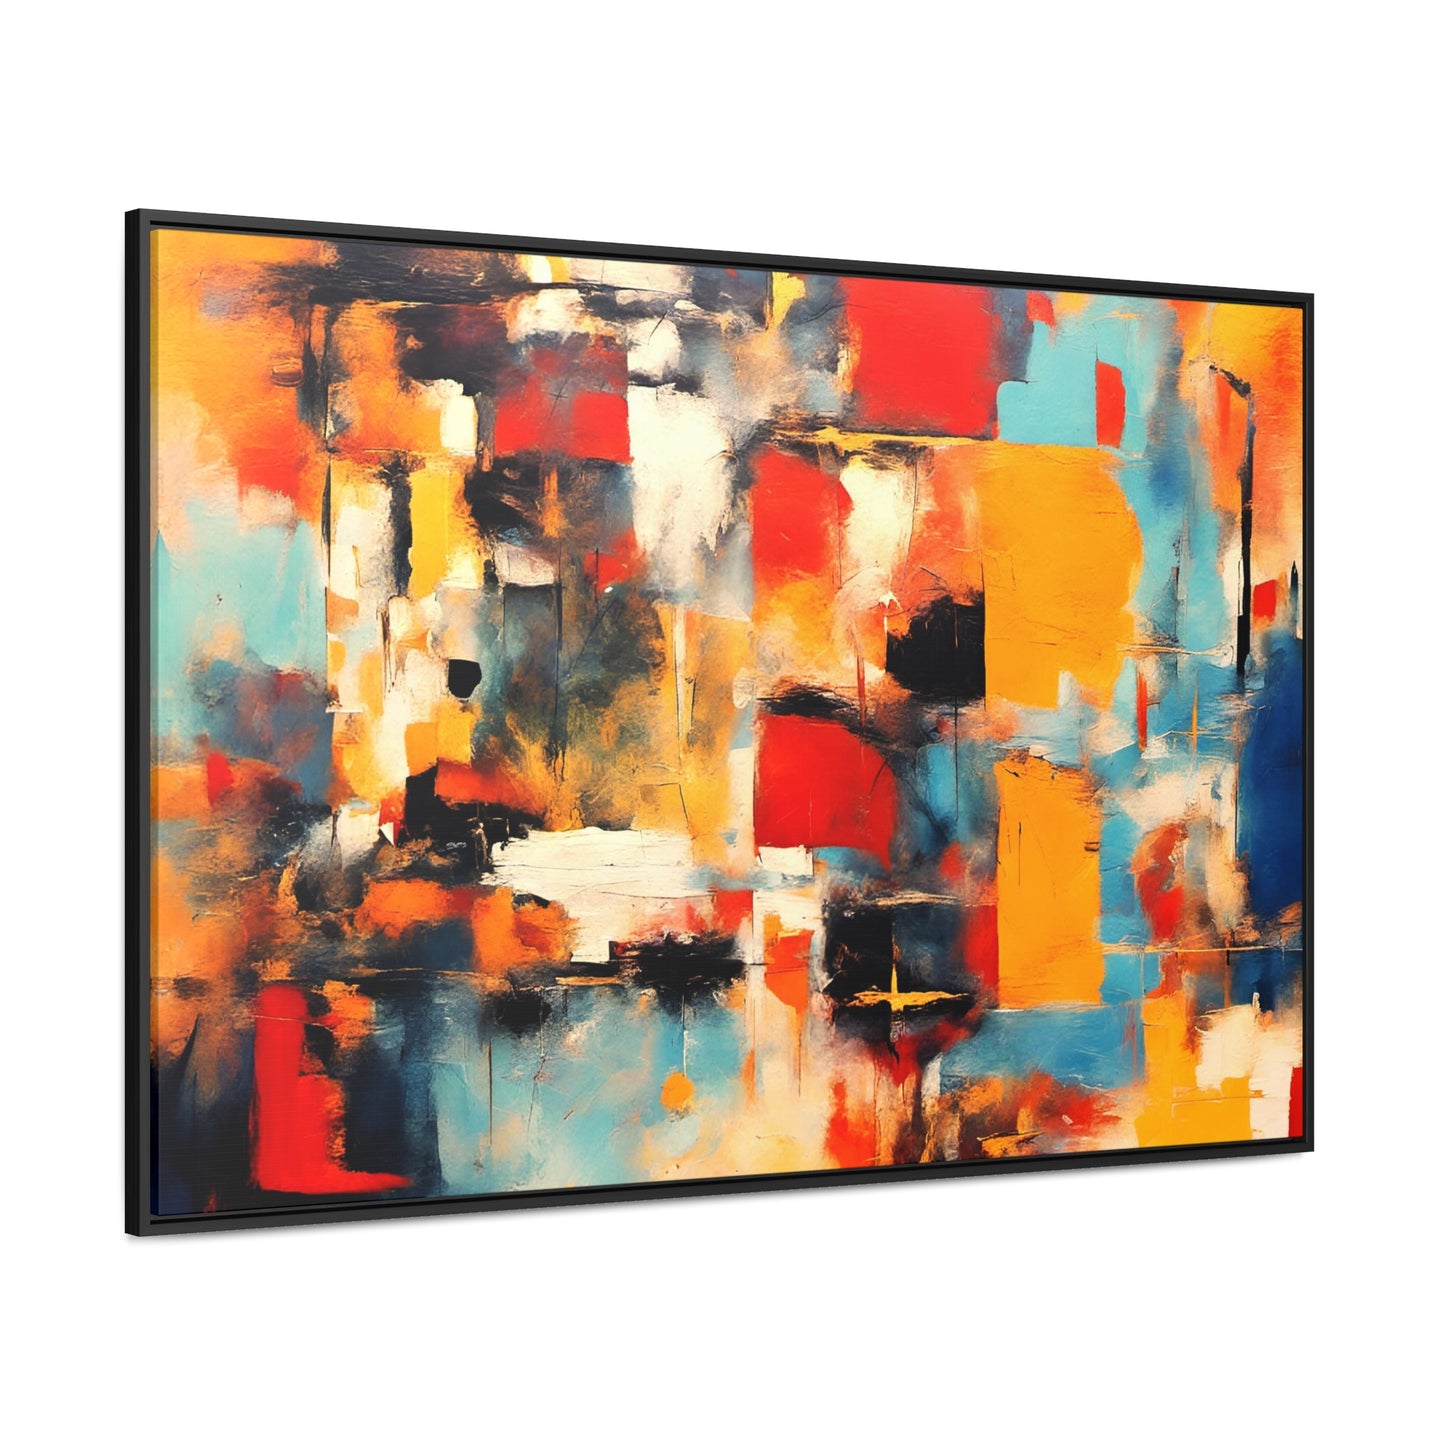 Modern Art Wall Print - Reflection of Multicolor Patches Print on Canvas in a Floating Frame